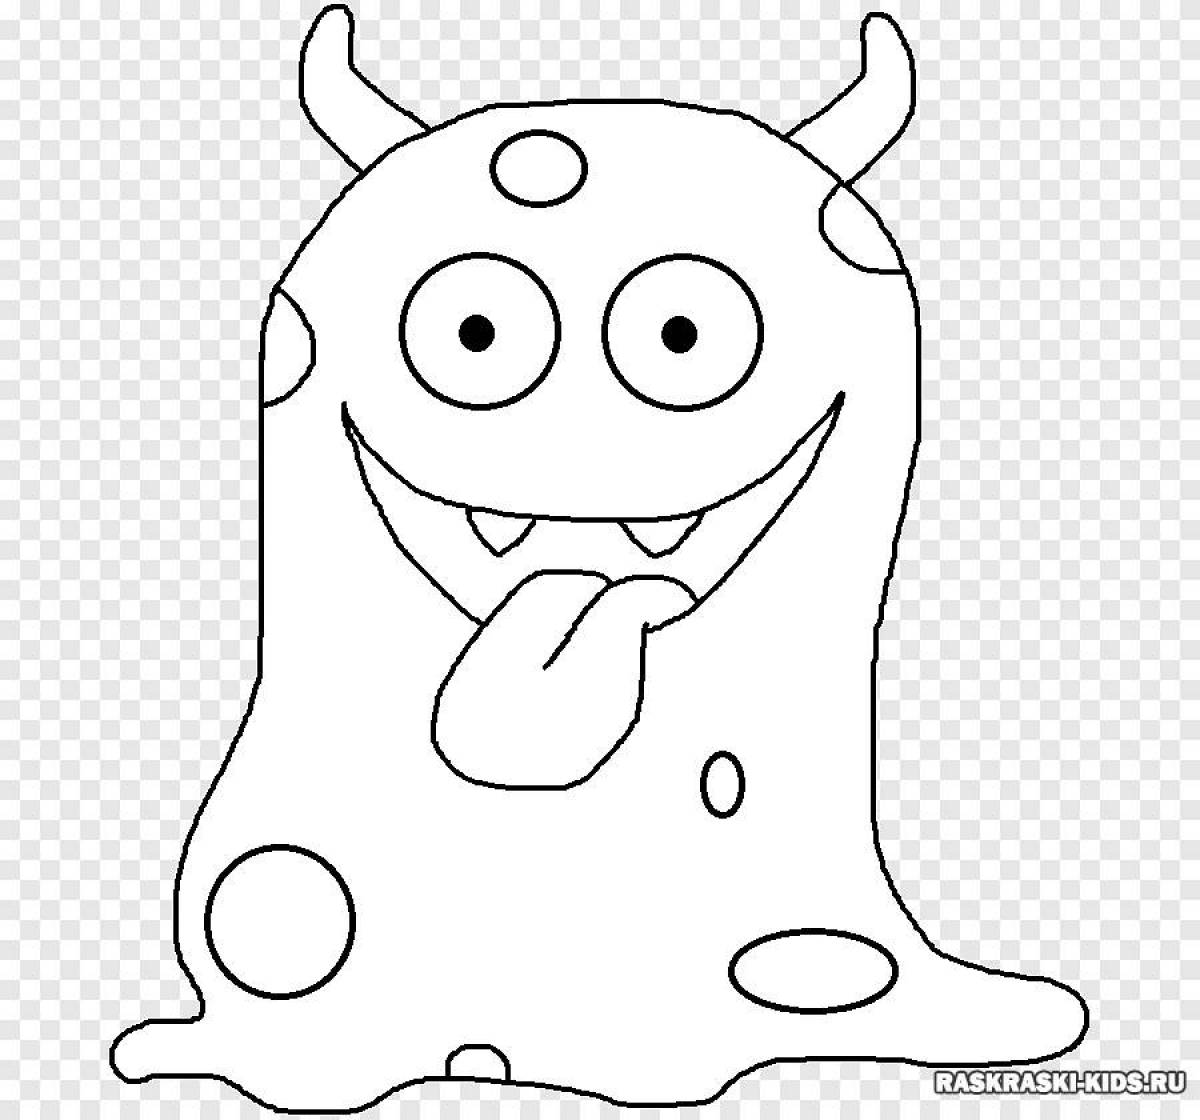 Spooky monster coloring pages